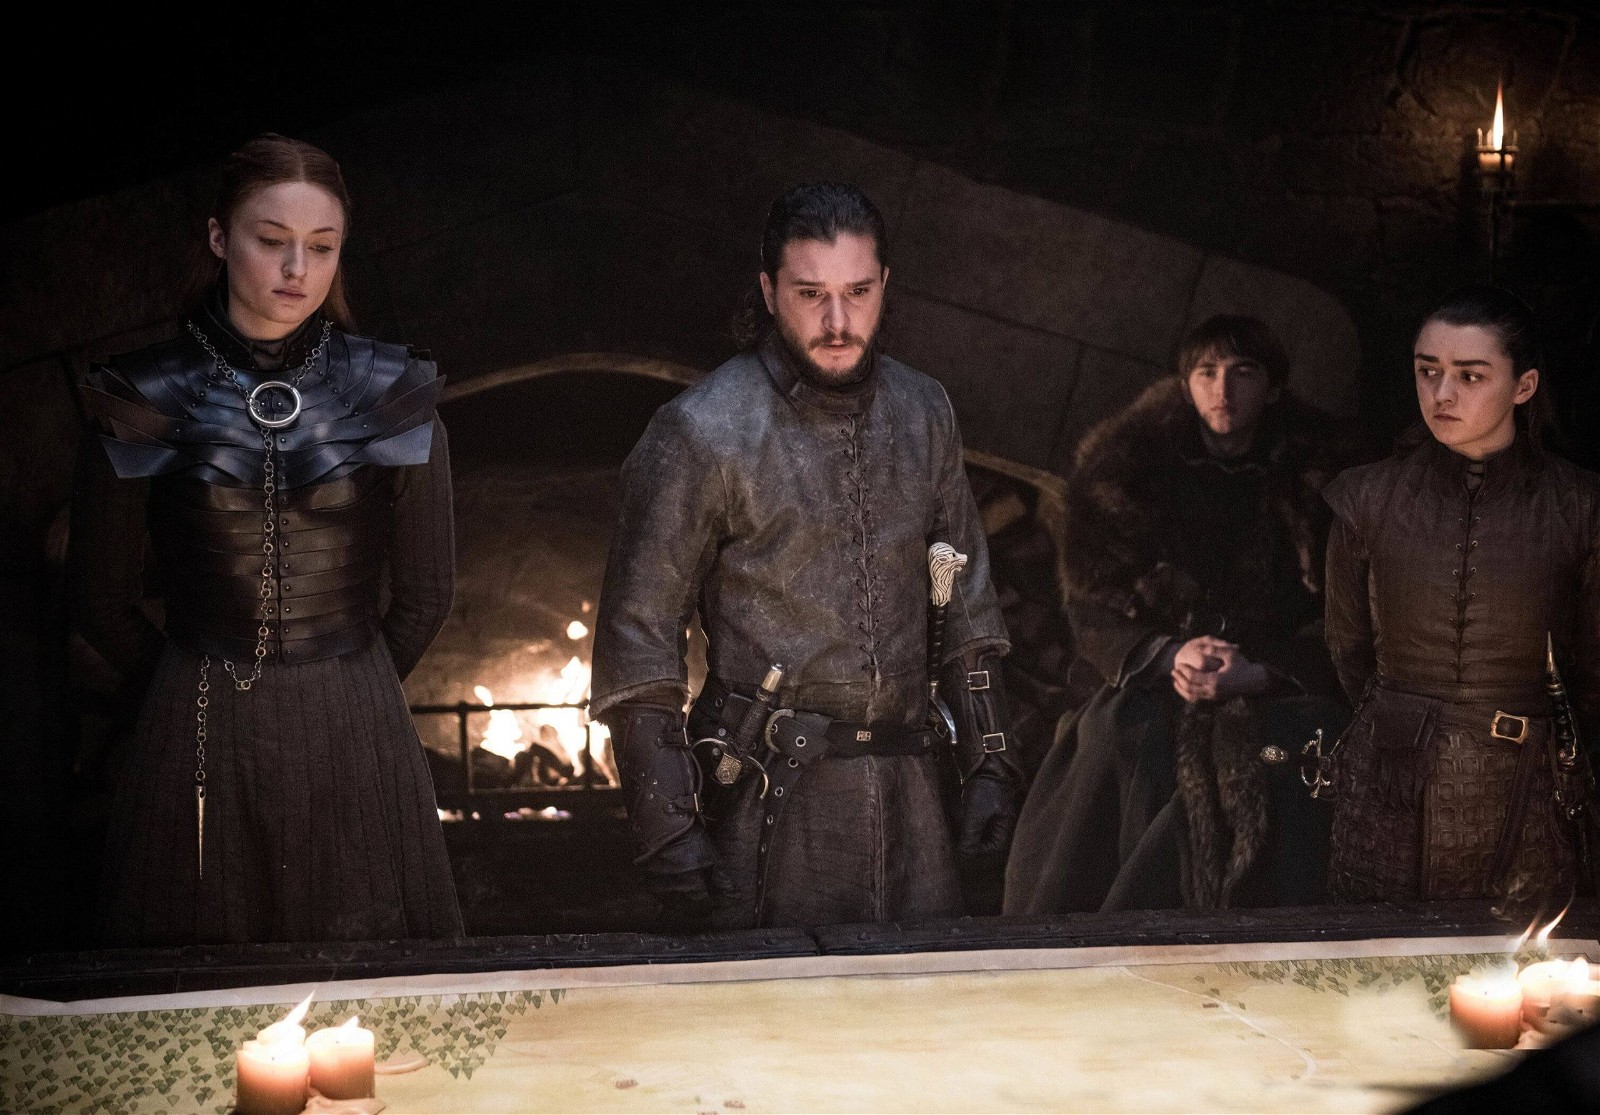 Maisie Williams with Sophie Turner, Kit Harington, and Isaac Hempstead-Wright in Game of Thrones